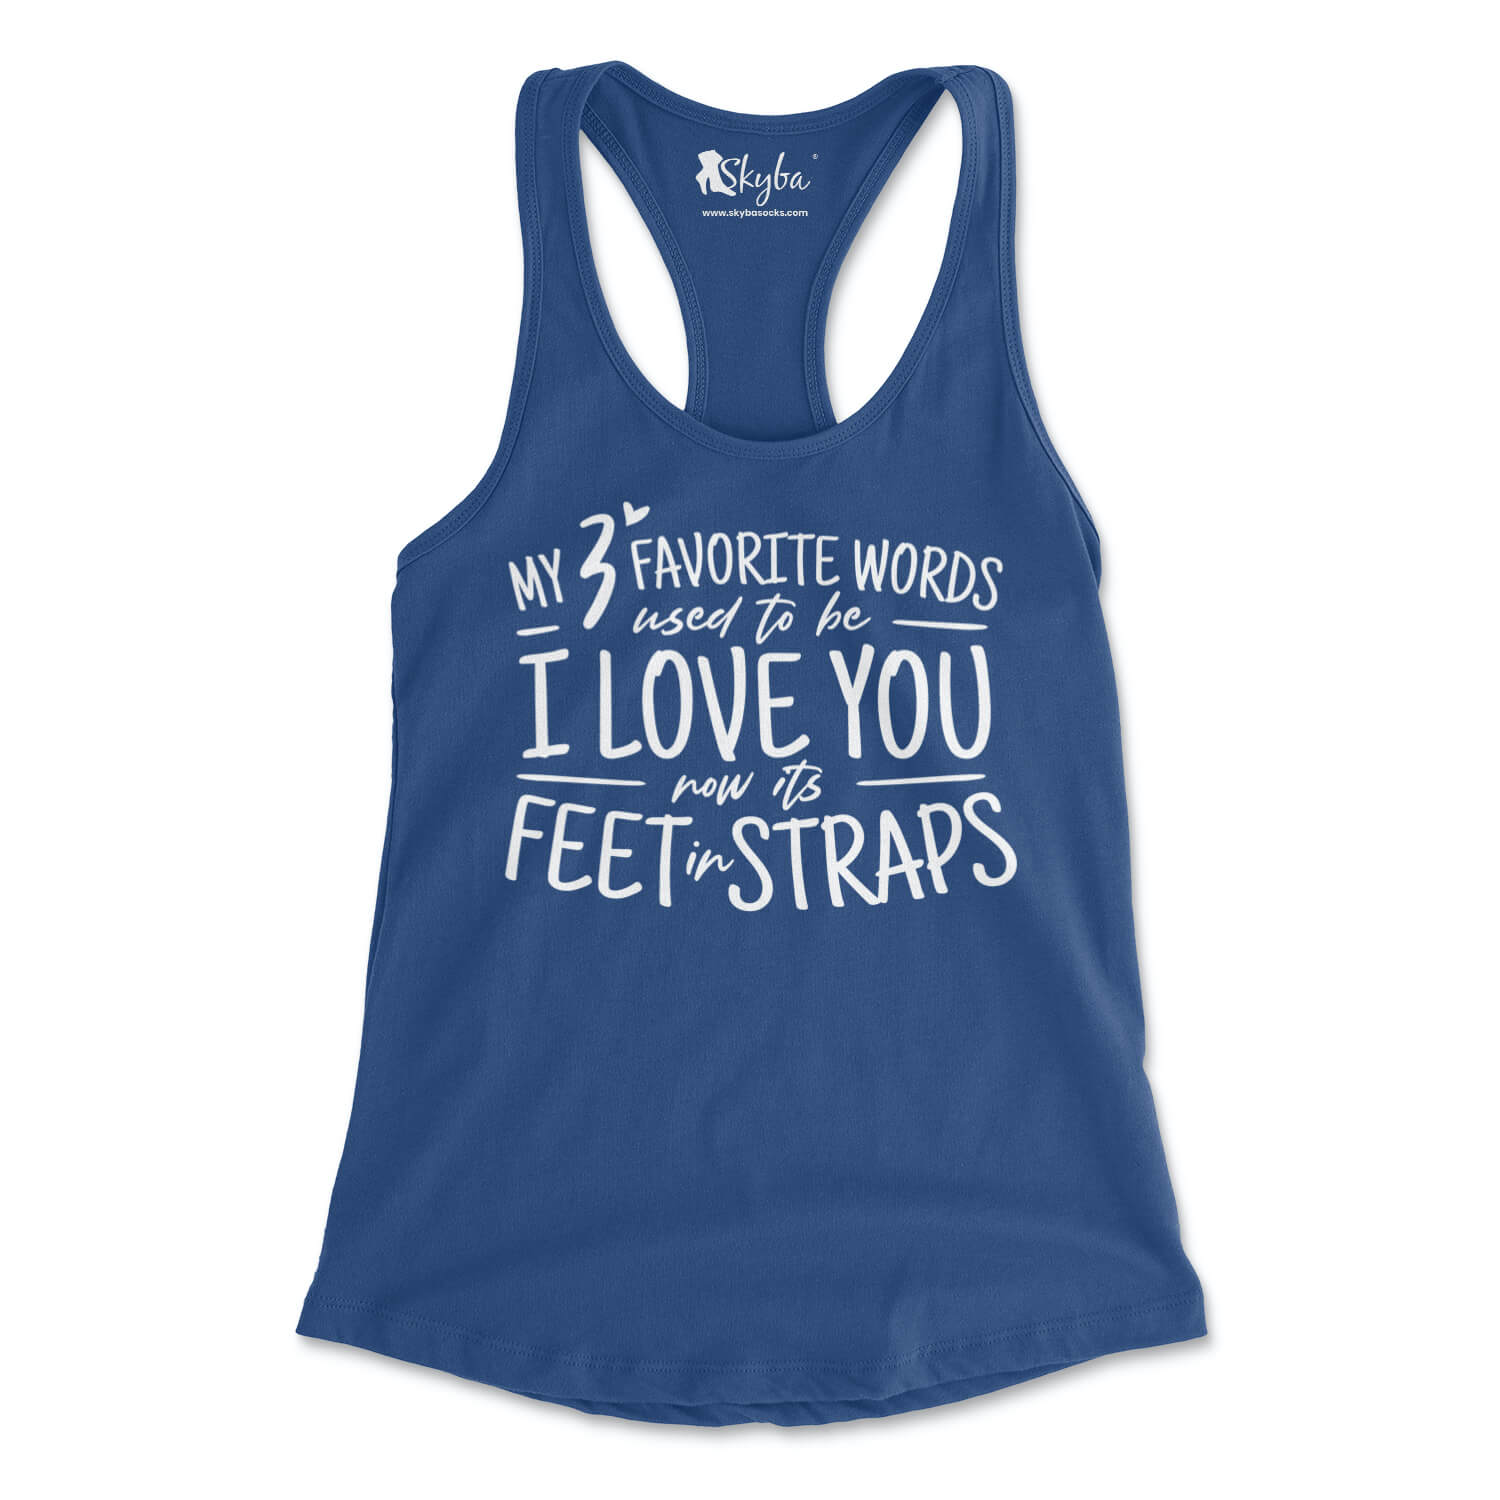 My 3 Favorite Words Used To Be I Love You Now It's Feet in Straps - Women's Slim Fit Tank Skyba Tank Top